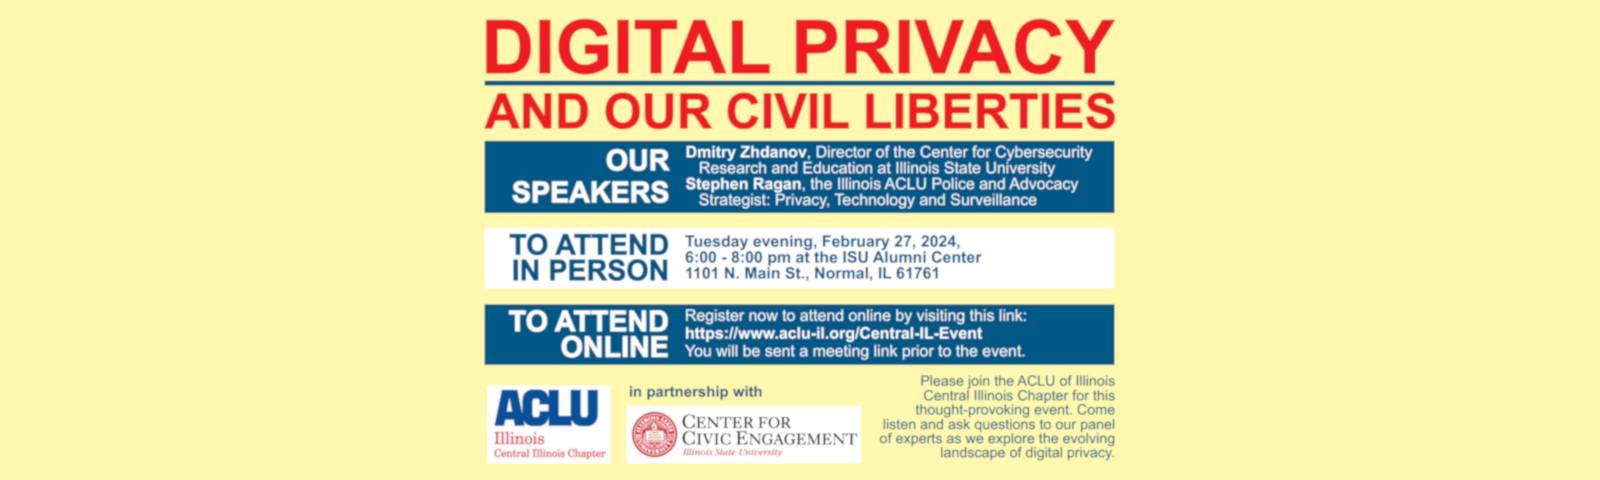 ACLU poster for Digital Privacy & Our Civil Liberties